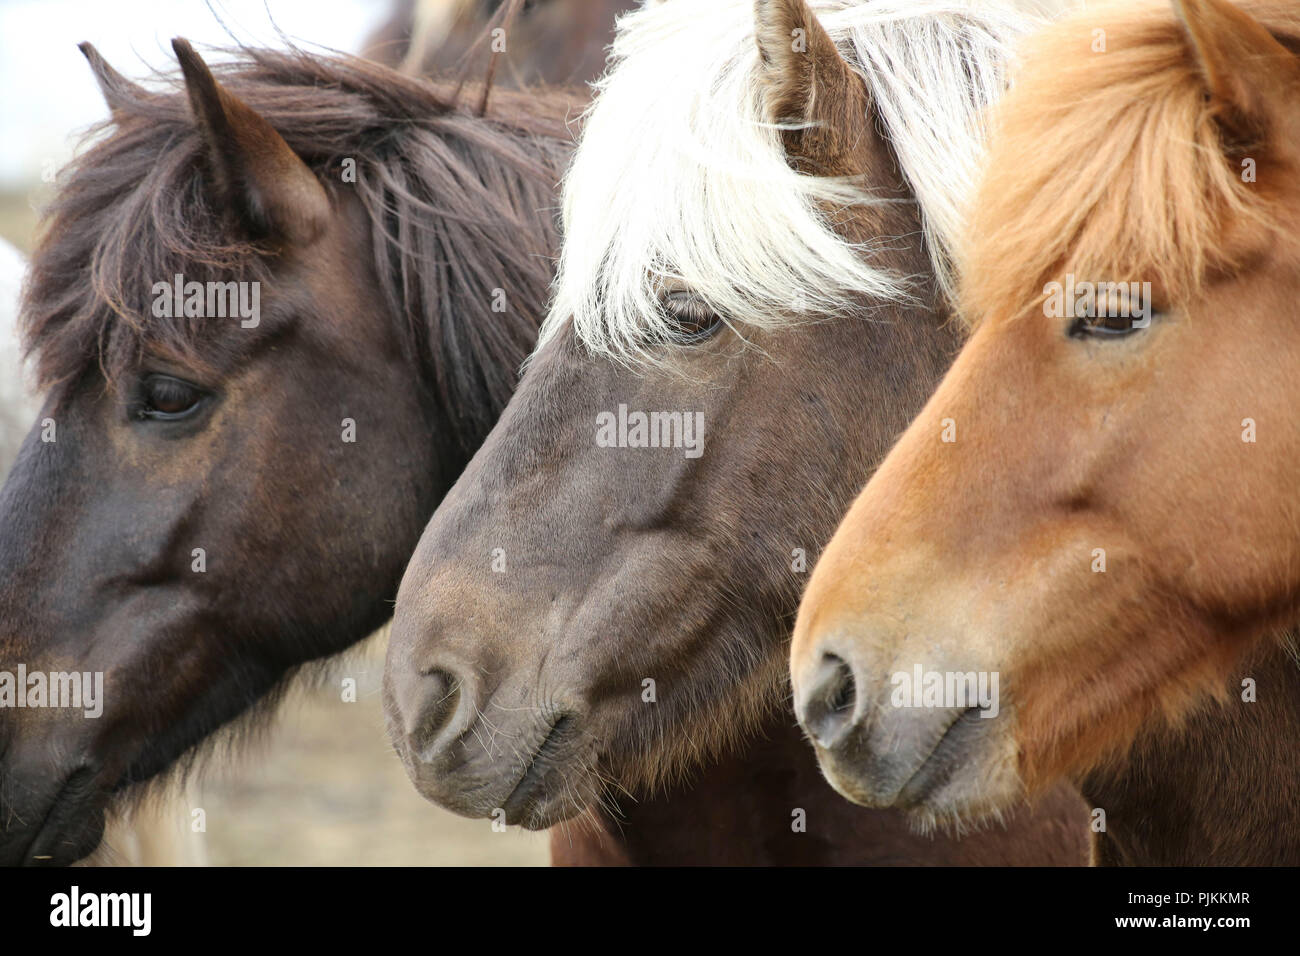 Iceland, three Icelandic horses in a row, different colors Stock Photo